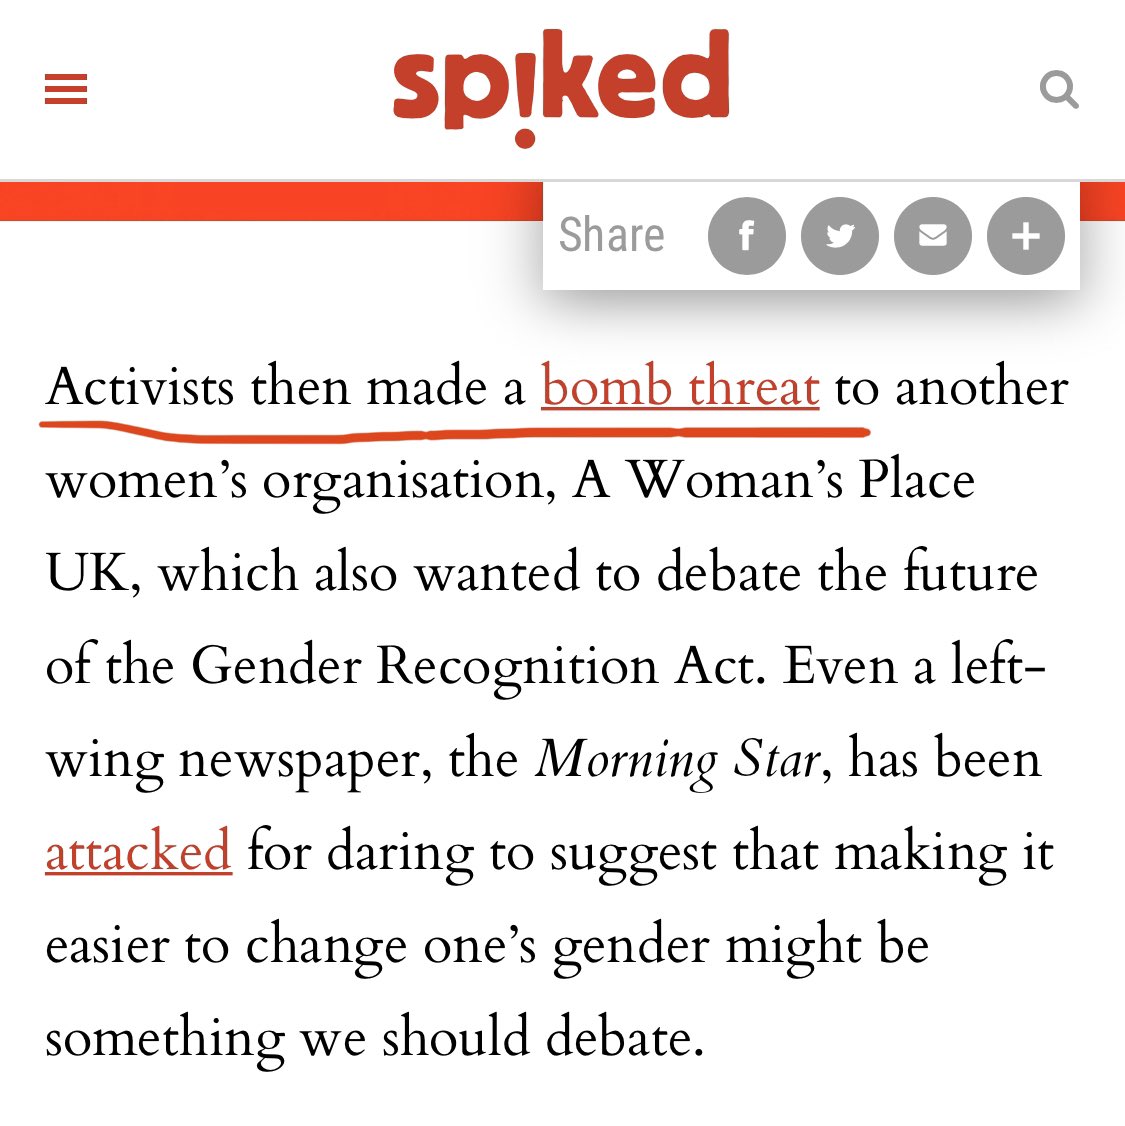 And so the lie spread... Even by those who had originally recognised that the non-existent “bomb threat” had come from a “Male Bo Derek” twitter troll, they now rewrote history, claiming it was “activists” on media platforms known to be trans-hostile...